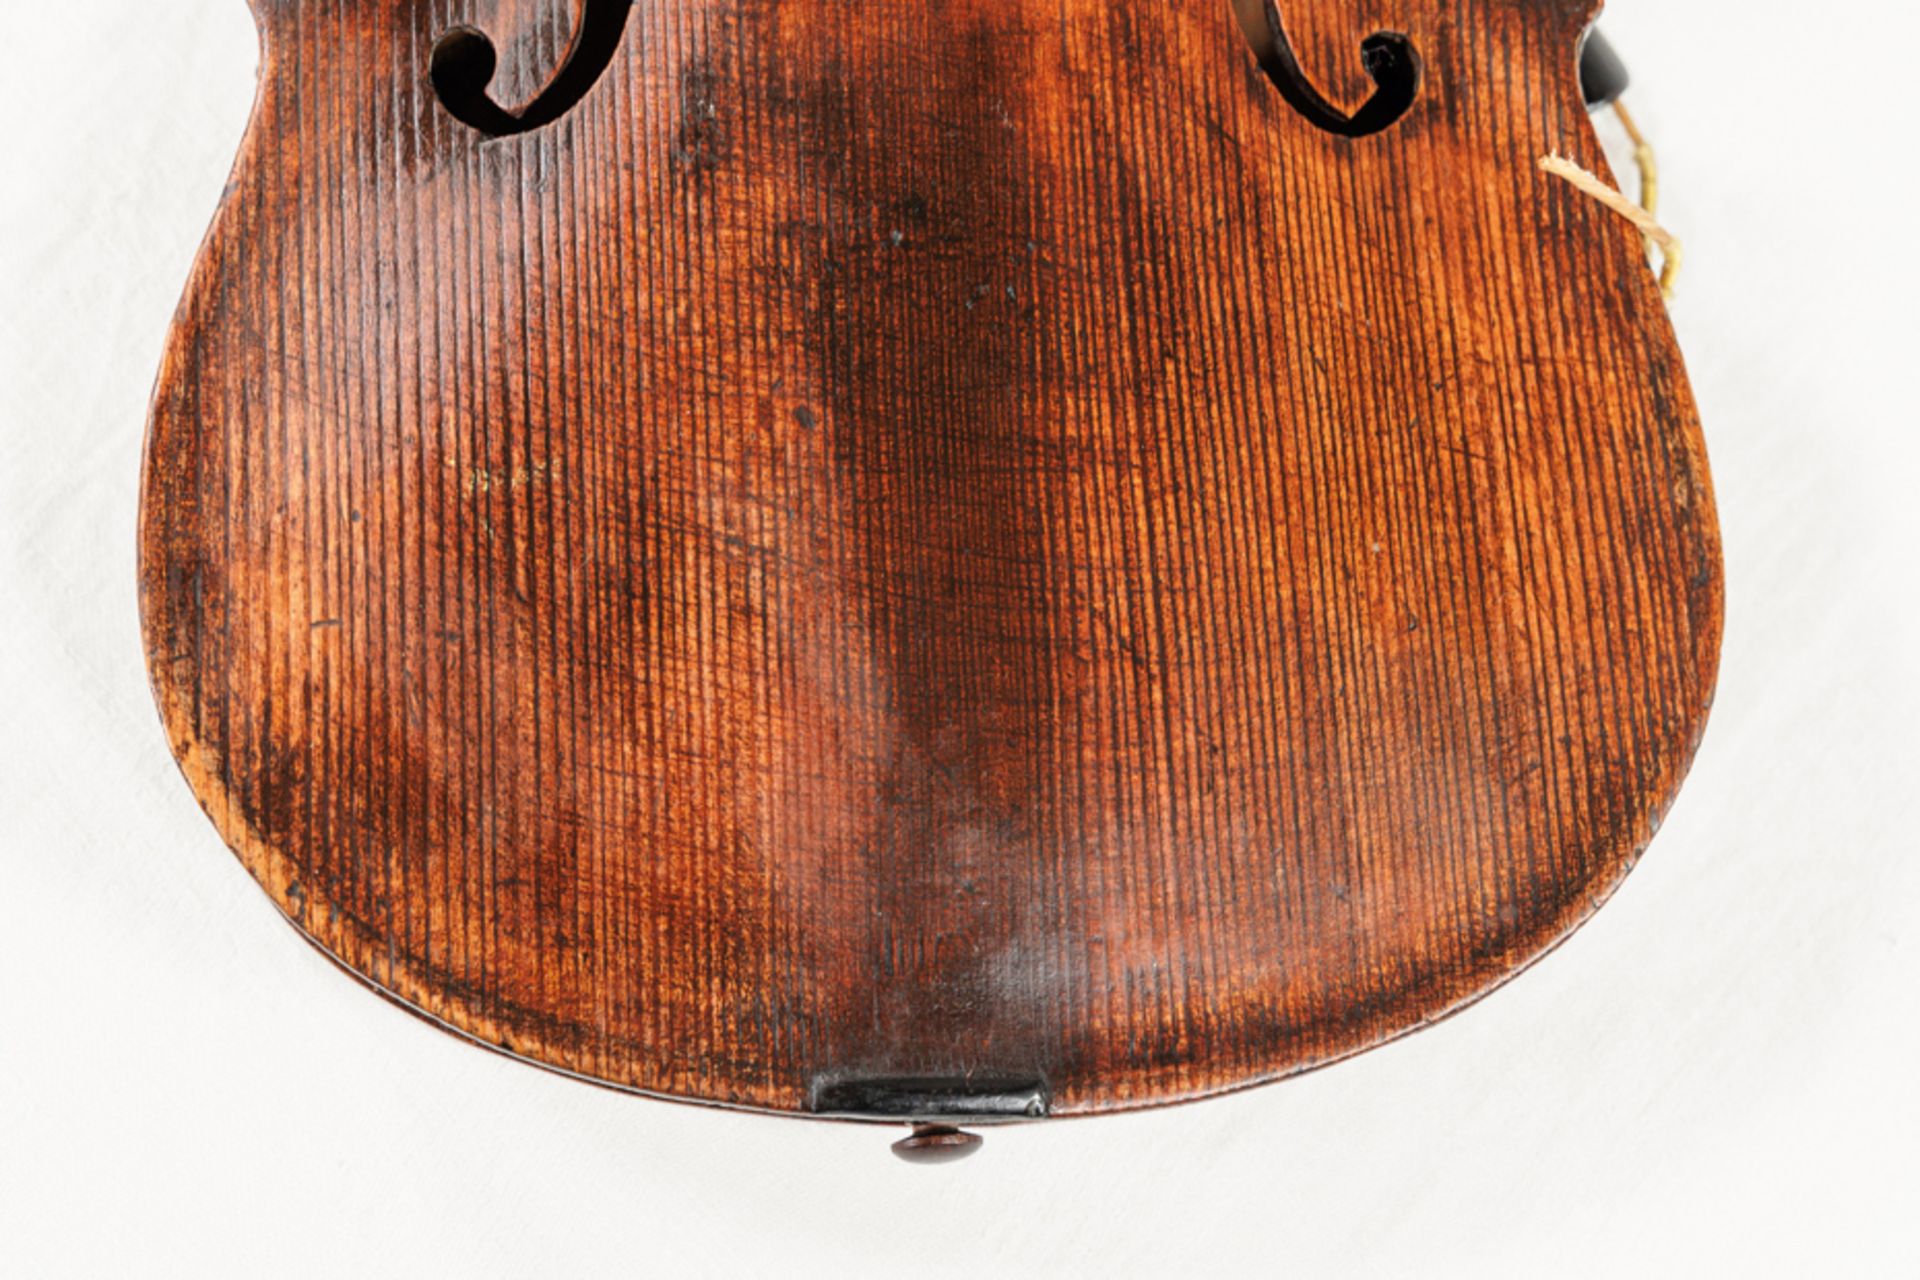 UNSIGNED HISTORICAL VIOLIN WITH CASE - Image 6 of 7